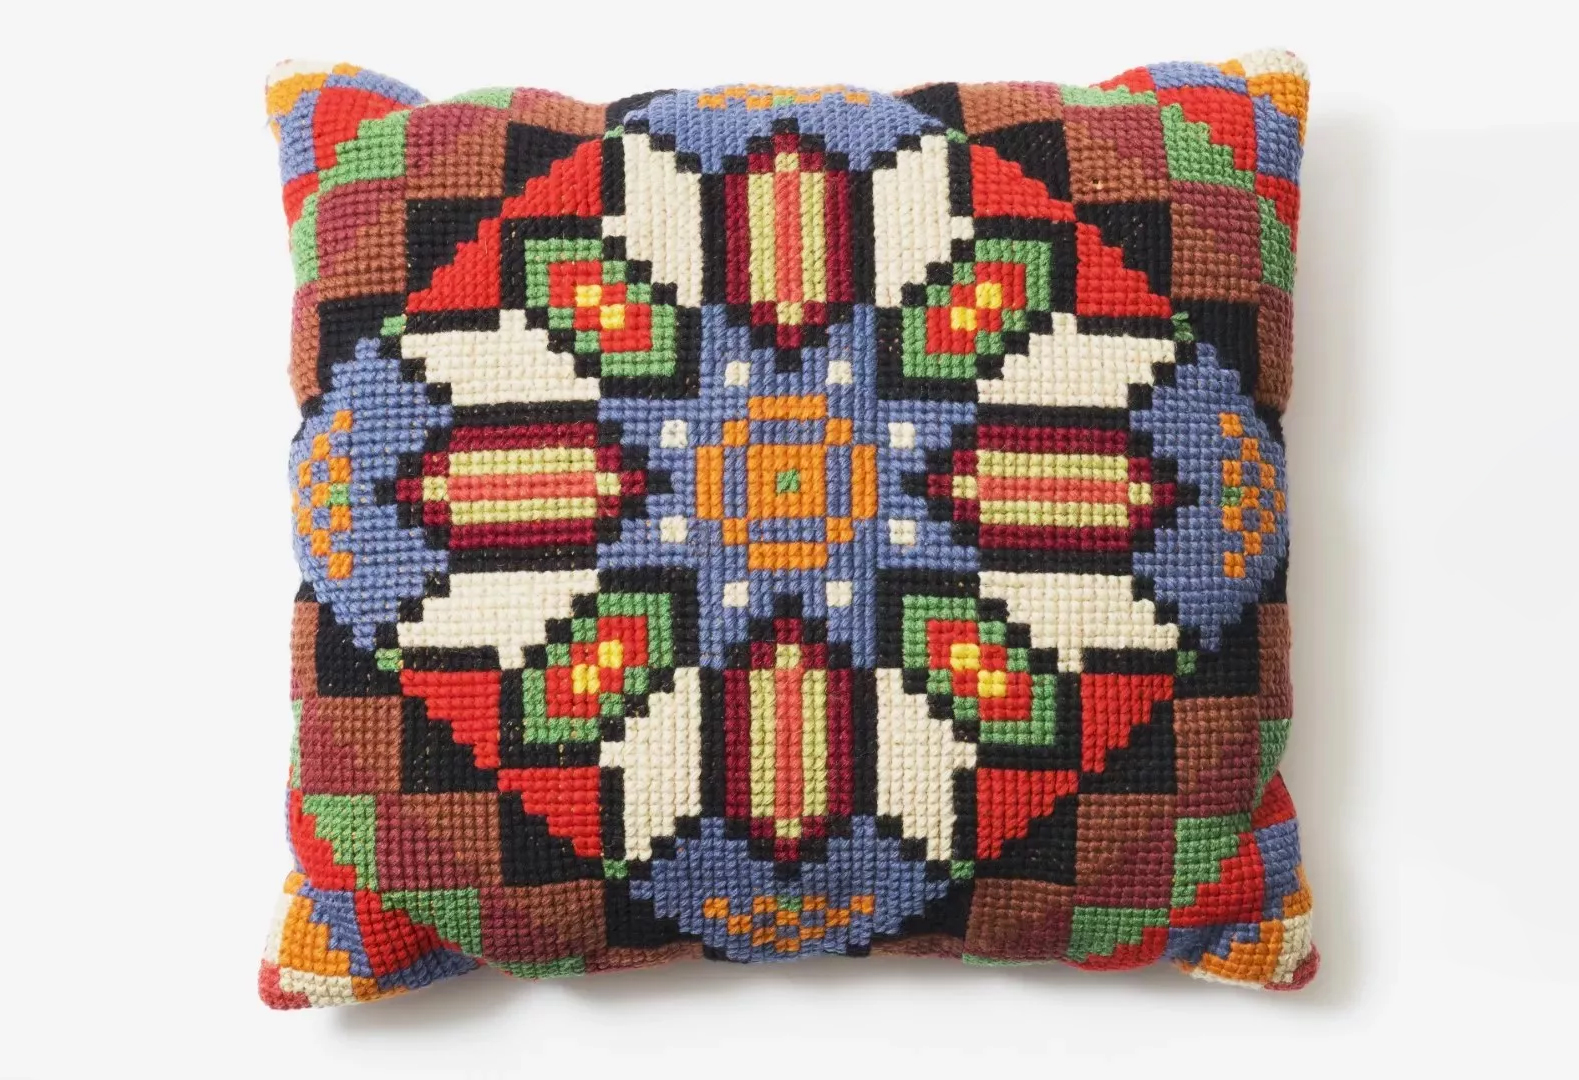 An embroidered multicoloured knitted cushion.